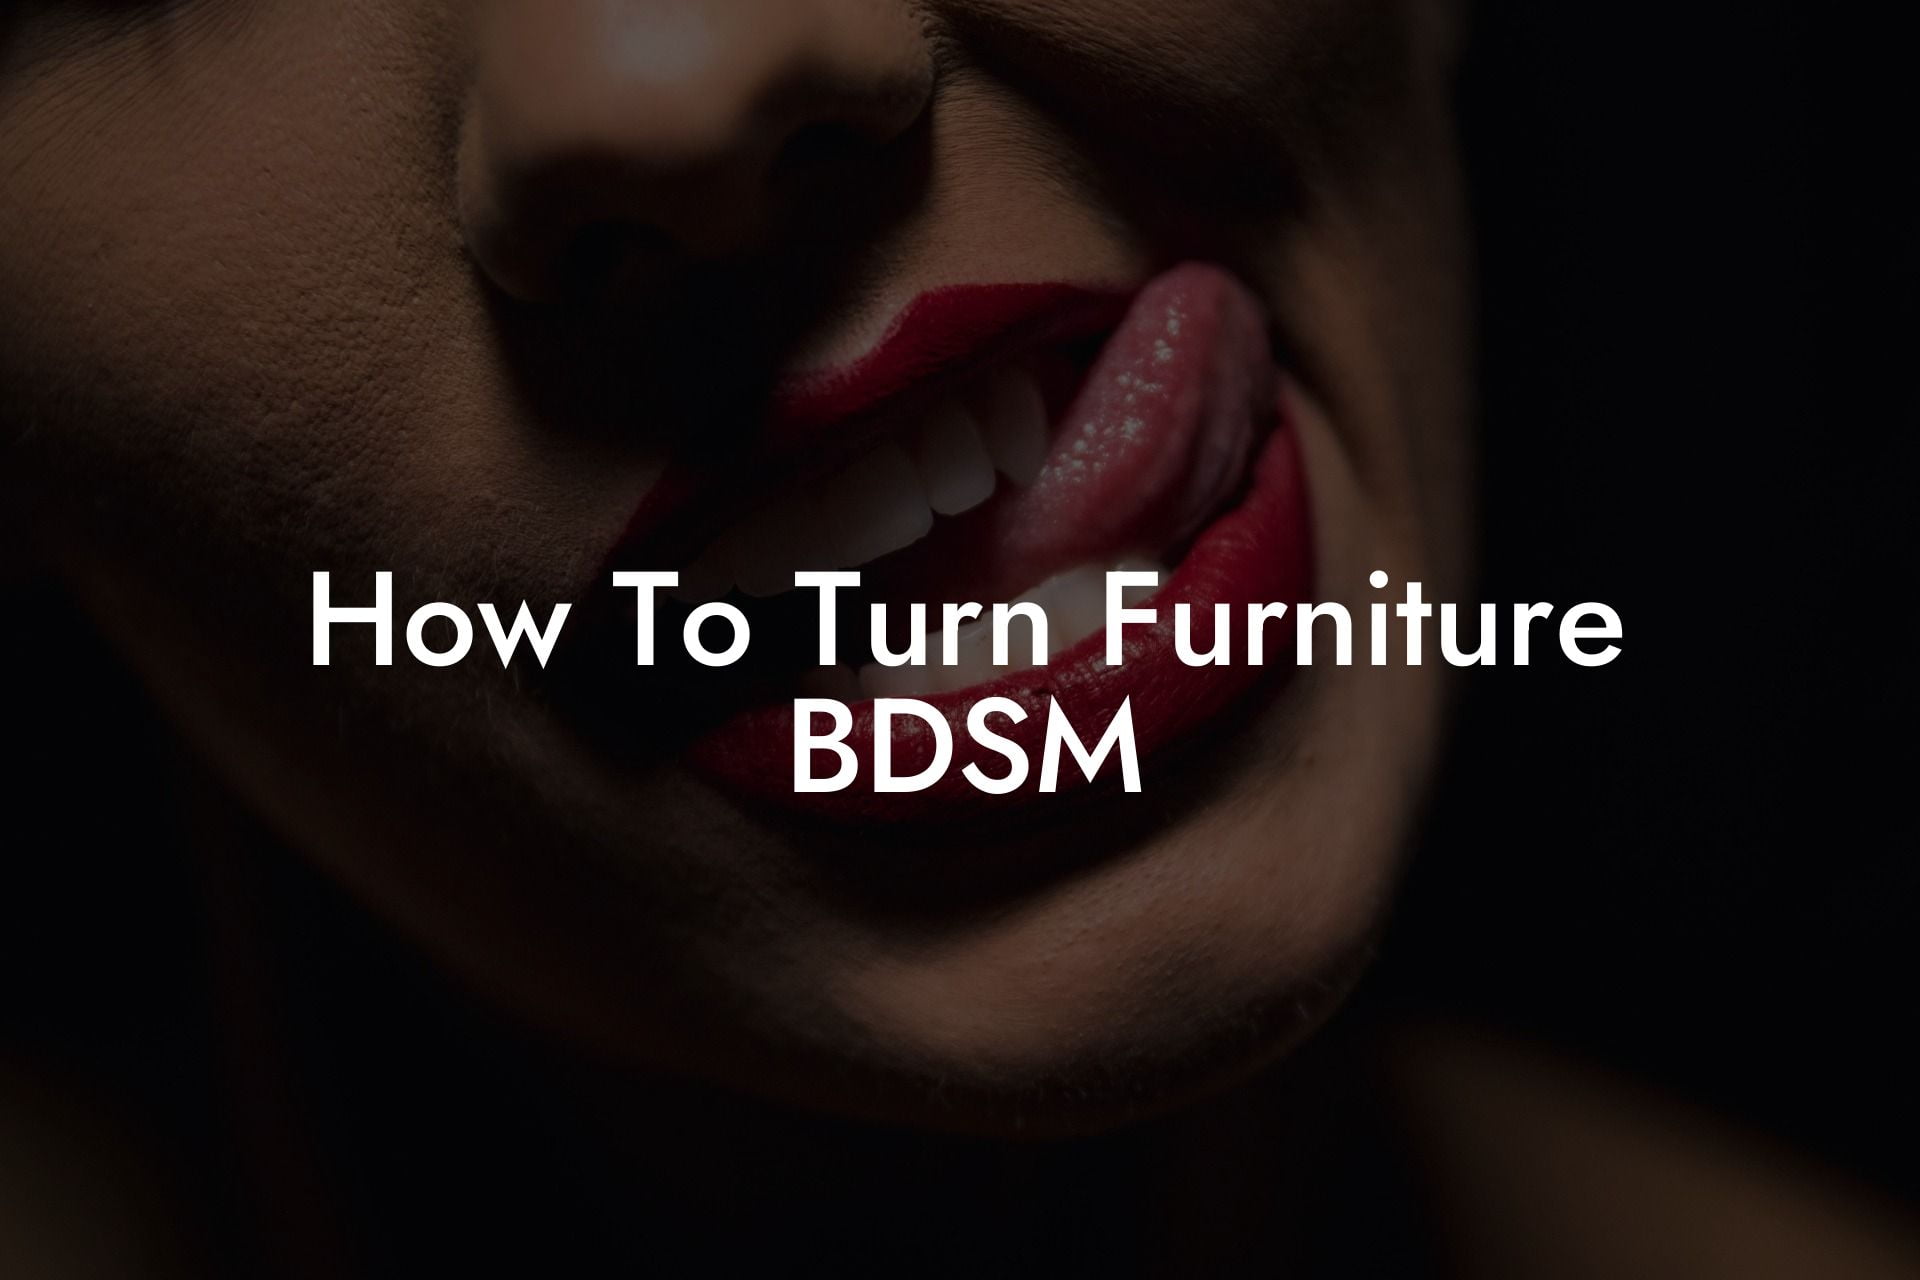 How To Turn Furniture BDSM